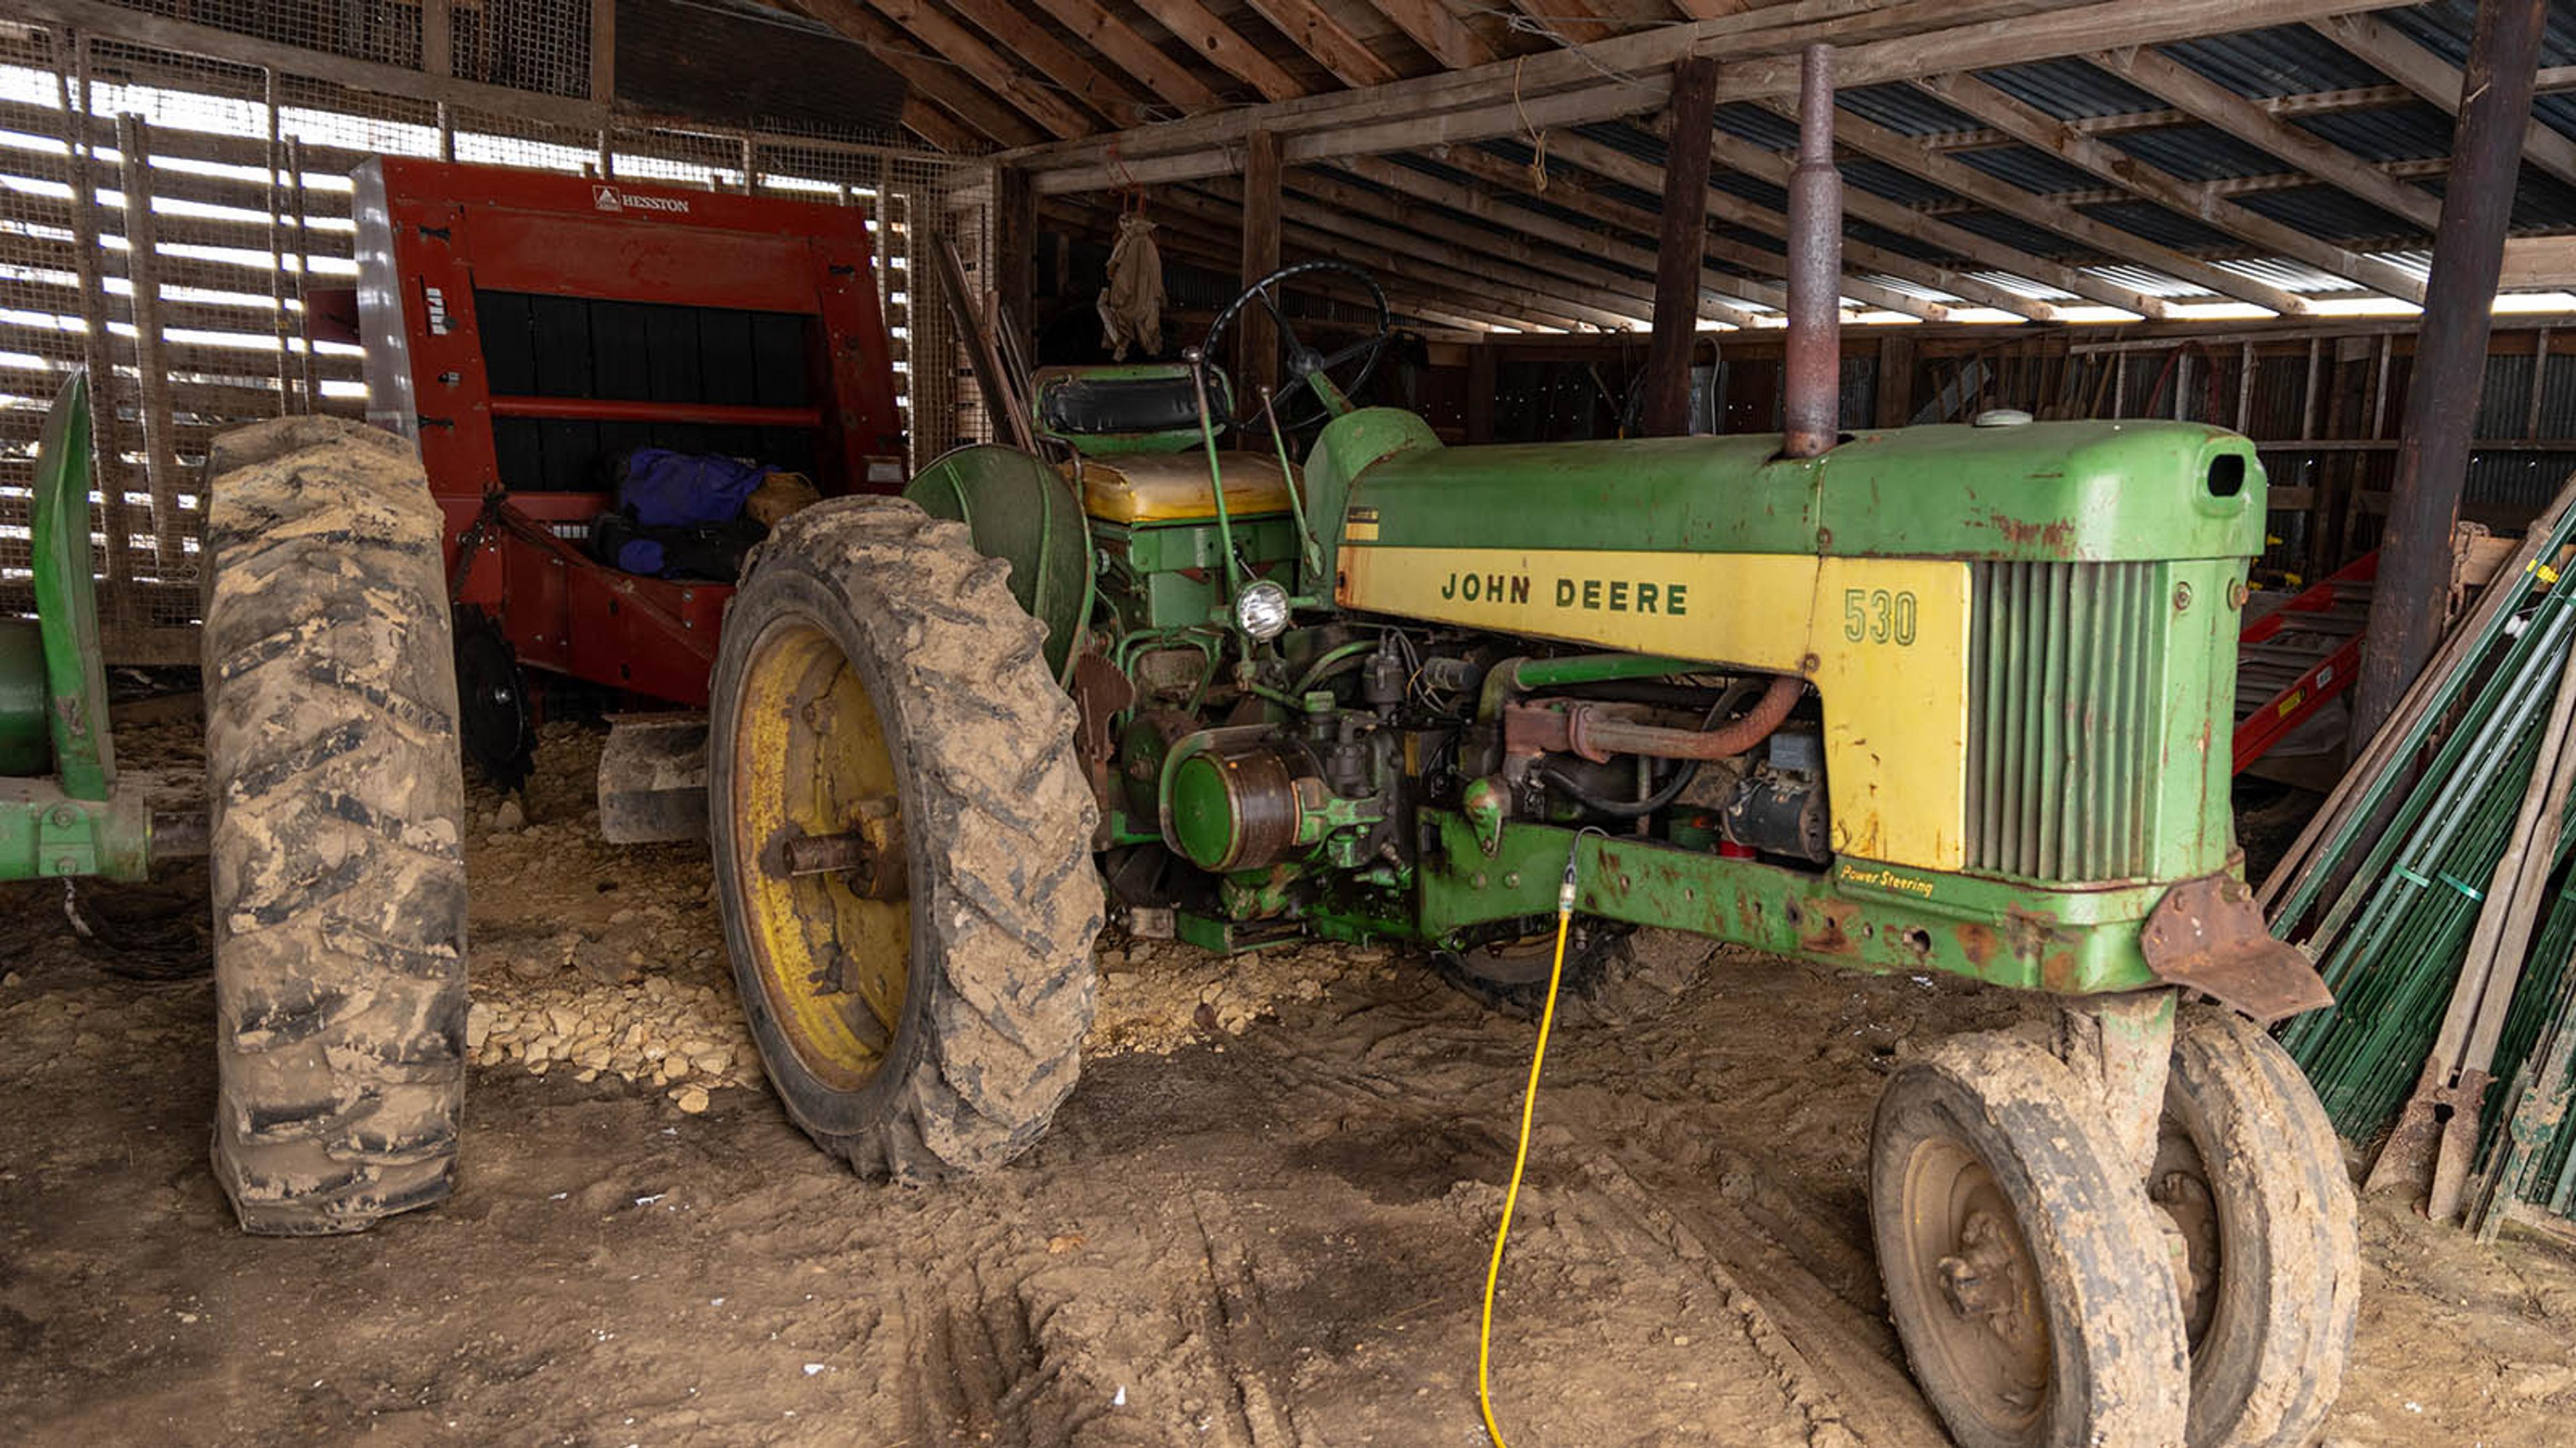 Old green John Deere diesel tractor in the barn with an electrical cord coming out of the engine.